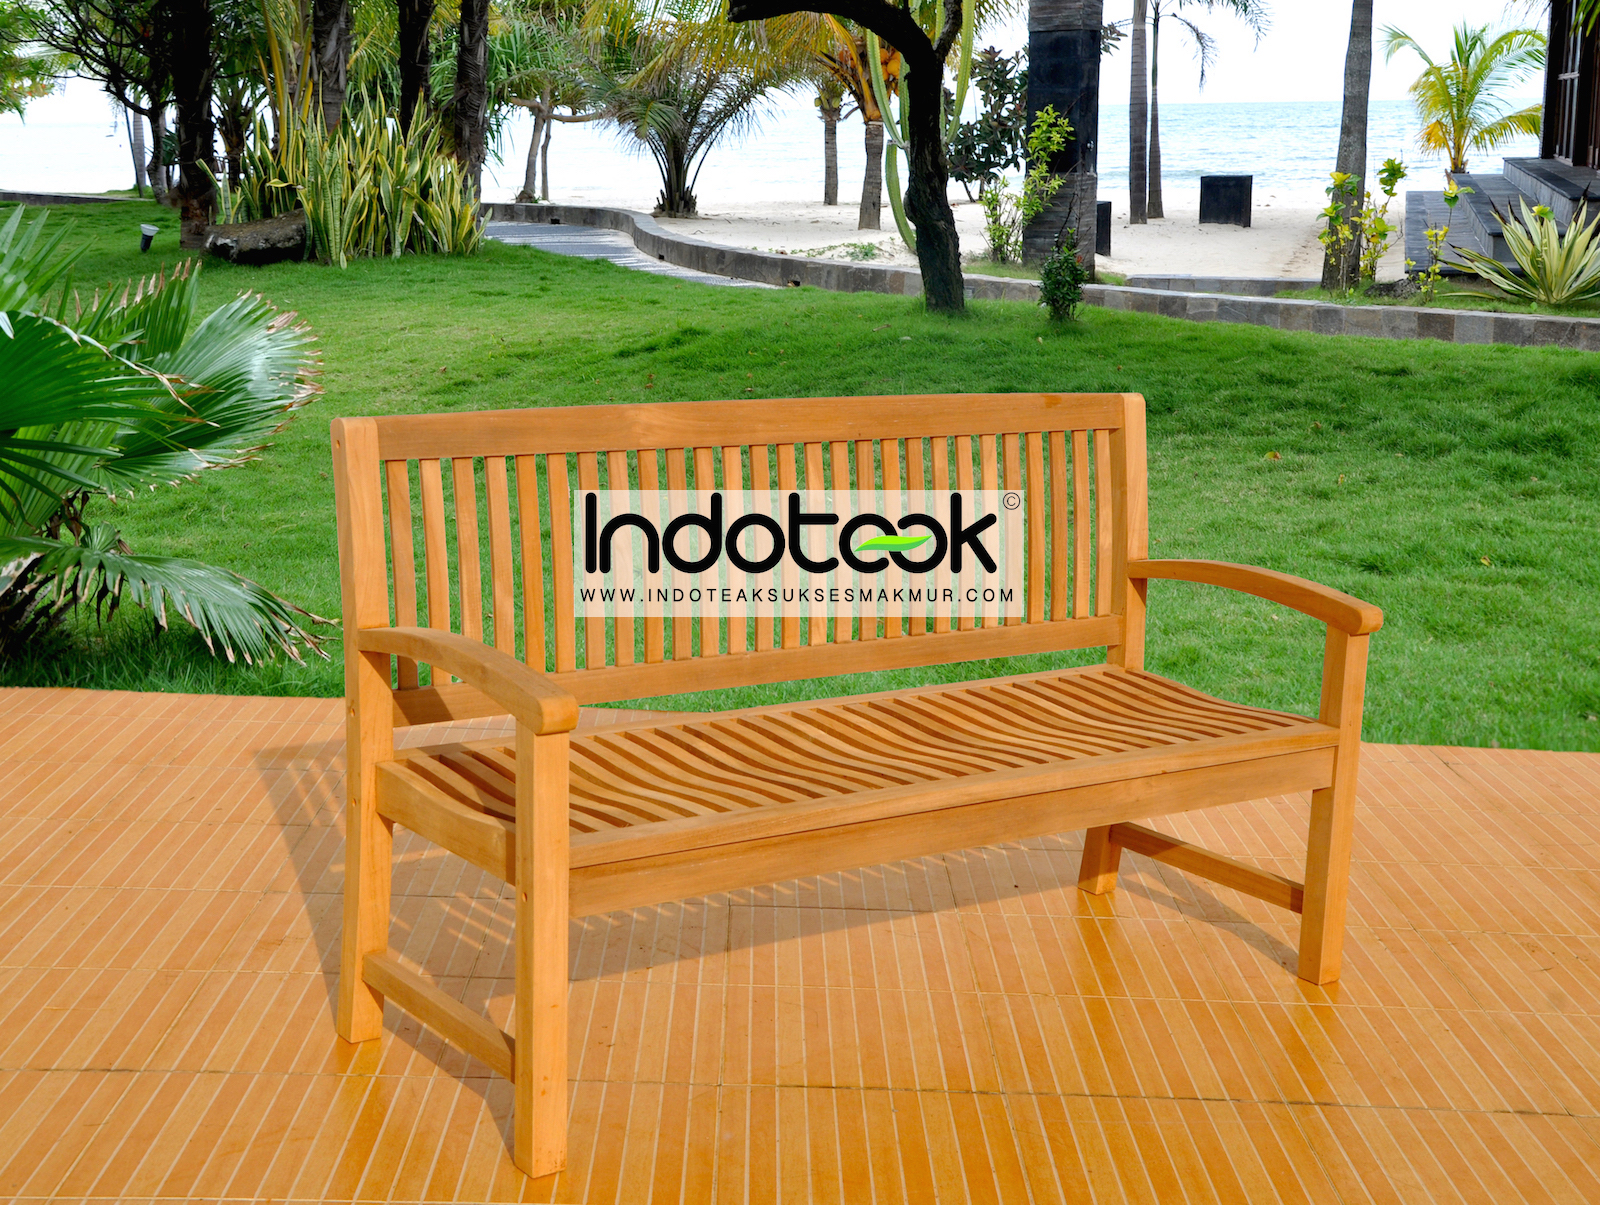 Garden bench furniture supplier and producer from Jepara